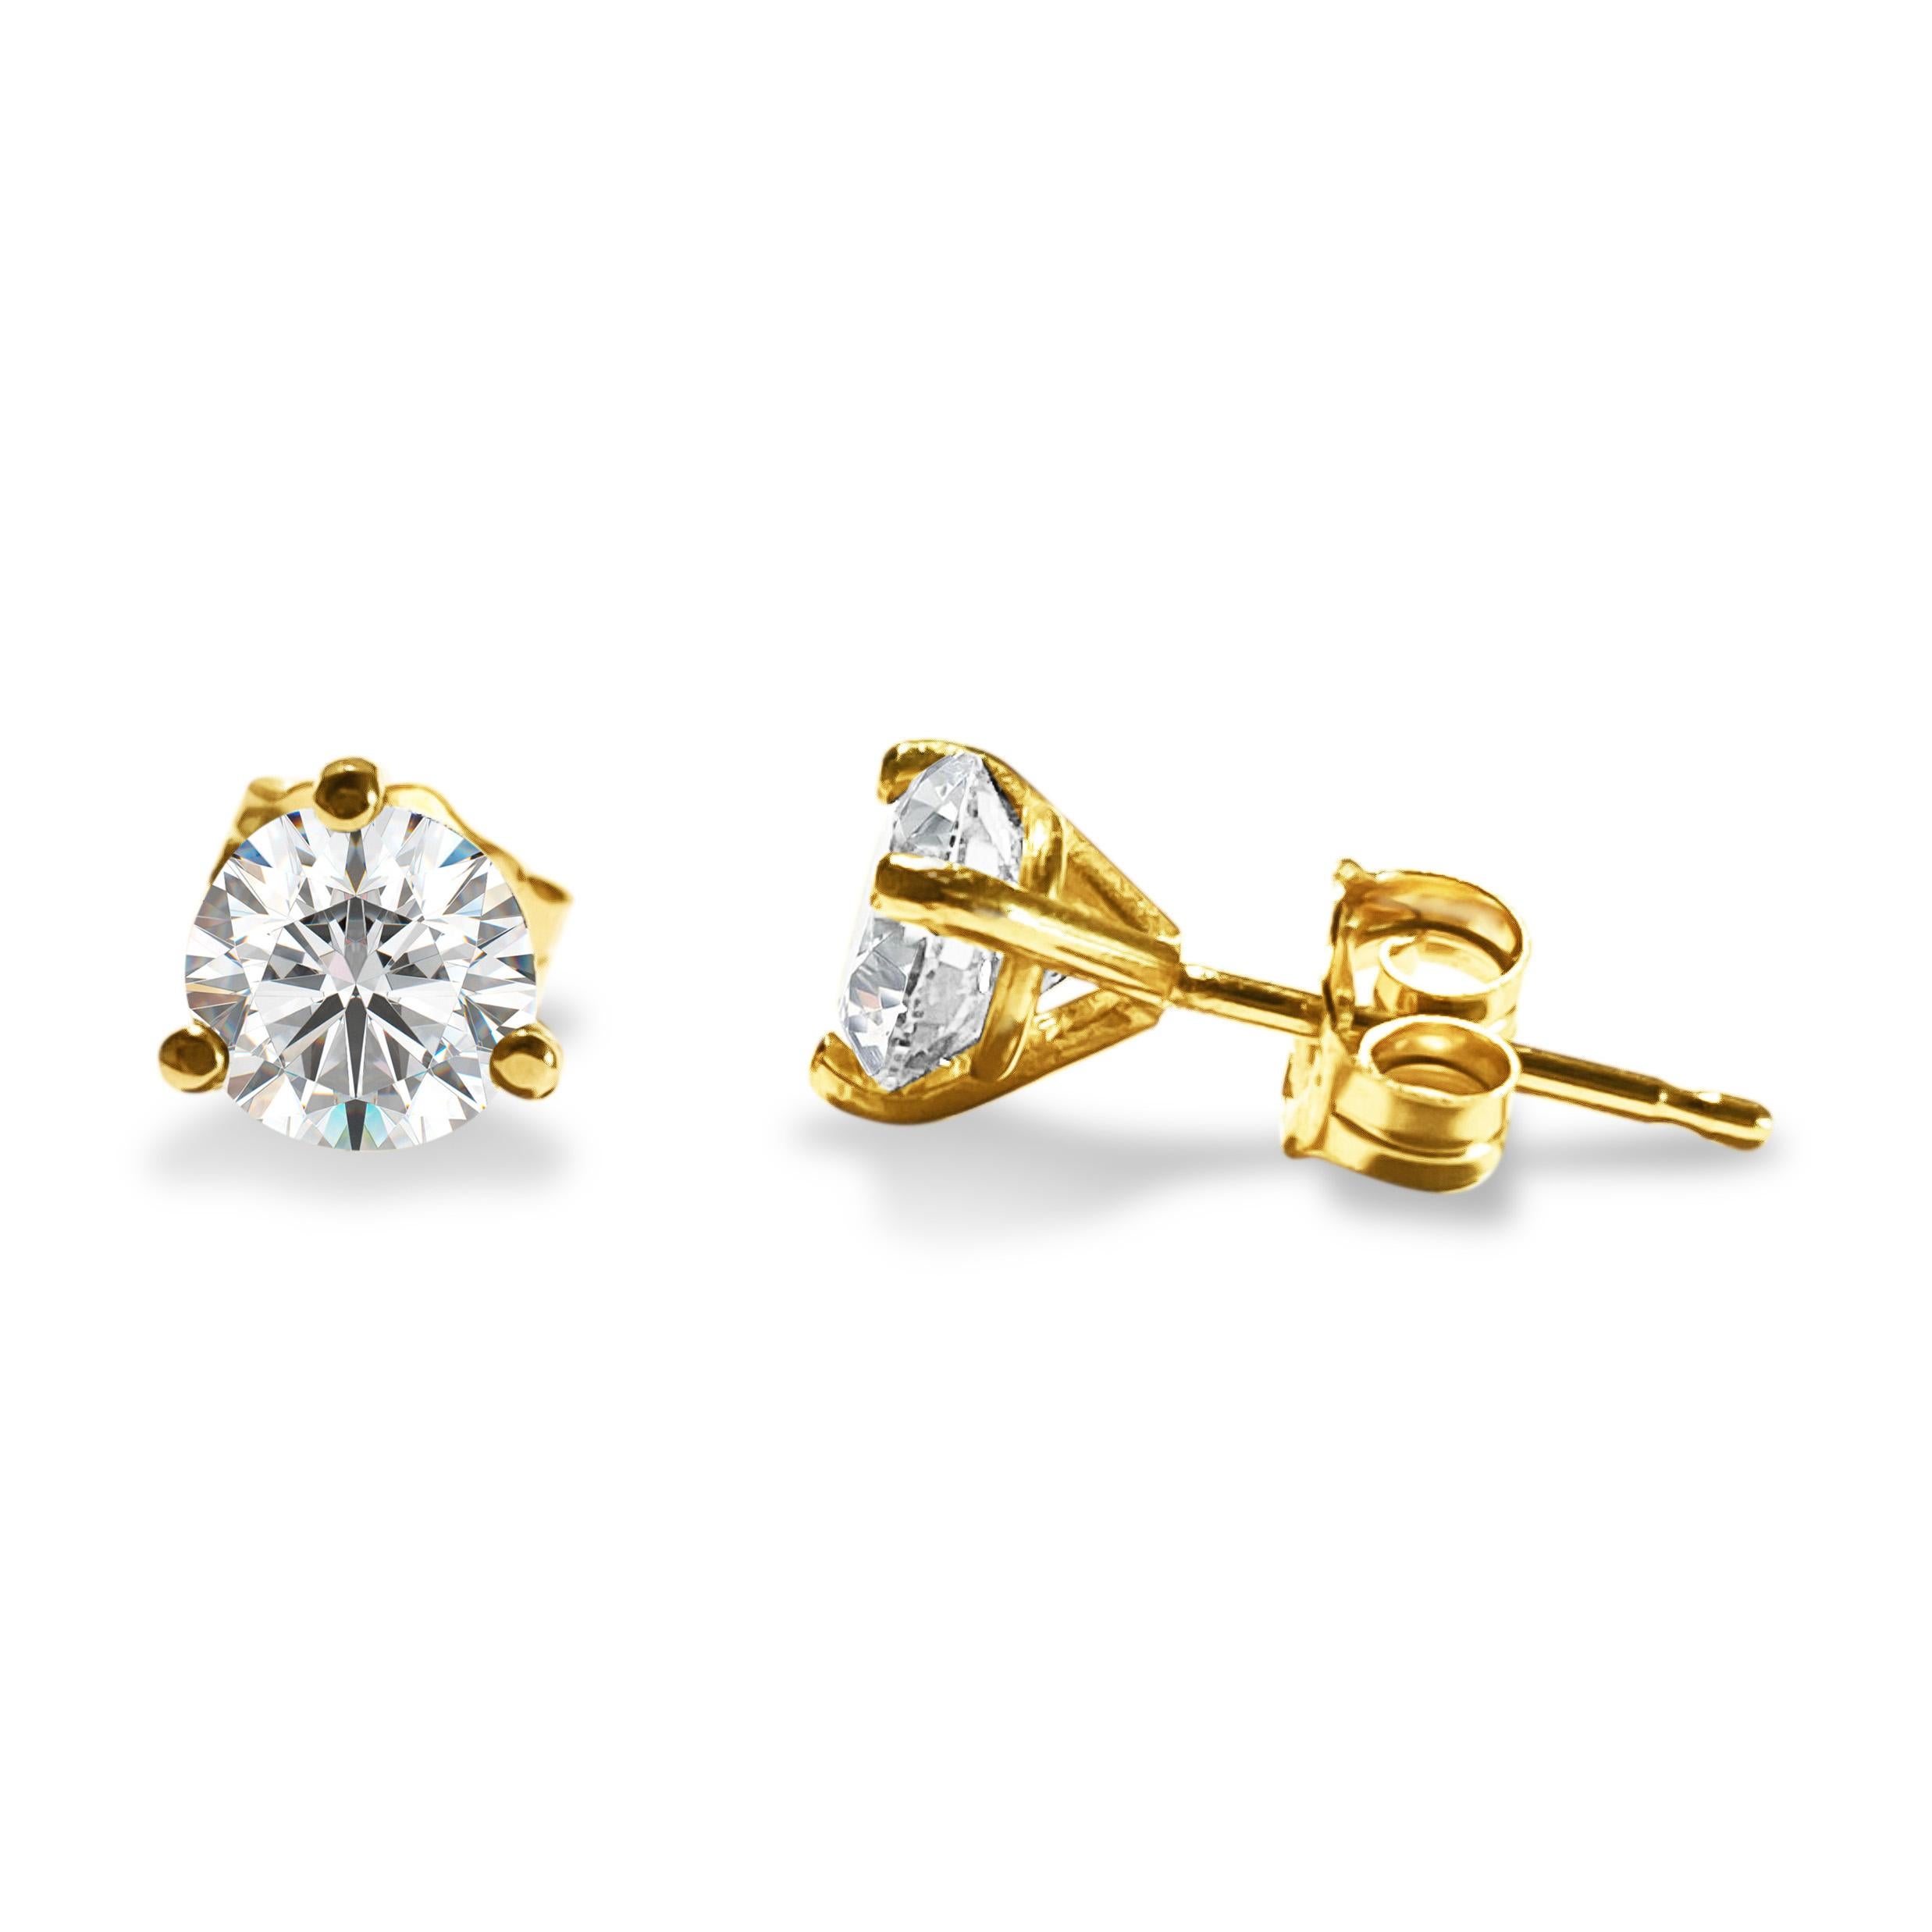 Metal: 14k yellow gold. 

Diamonds: 1.12 cwt. VVS clarity and H color. Round brilliant cut
100% natural earth mined.

Setting: Martini 3 prong. 

Beautiful martini push back studs. Classic diamond stud earrings. Excellent finish and shine. 